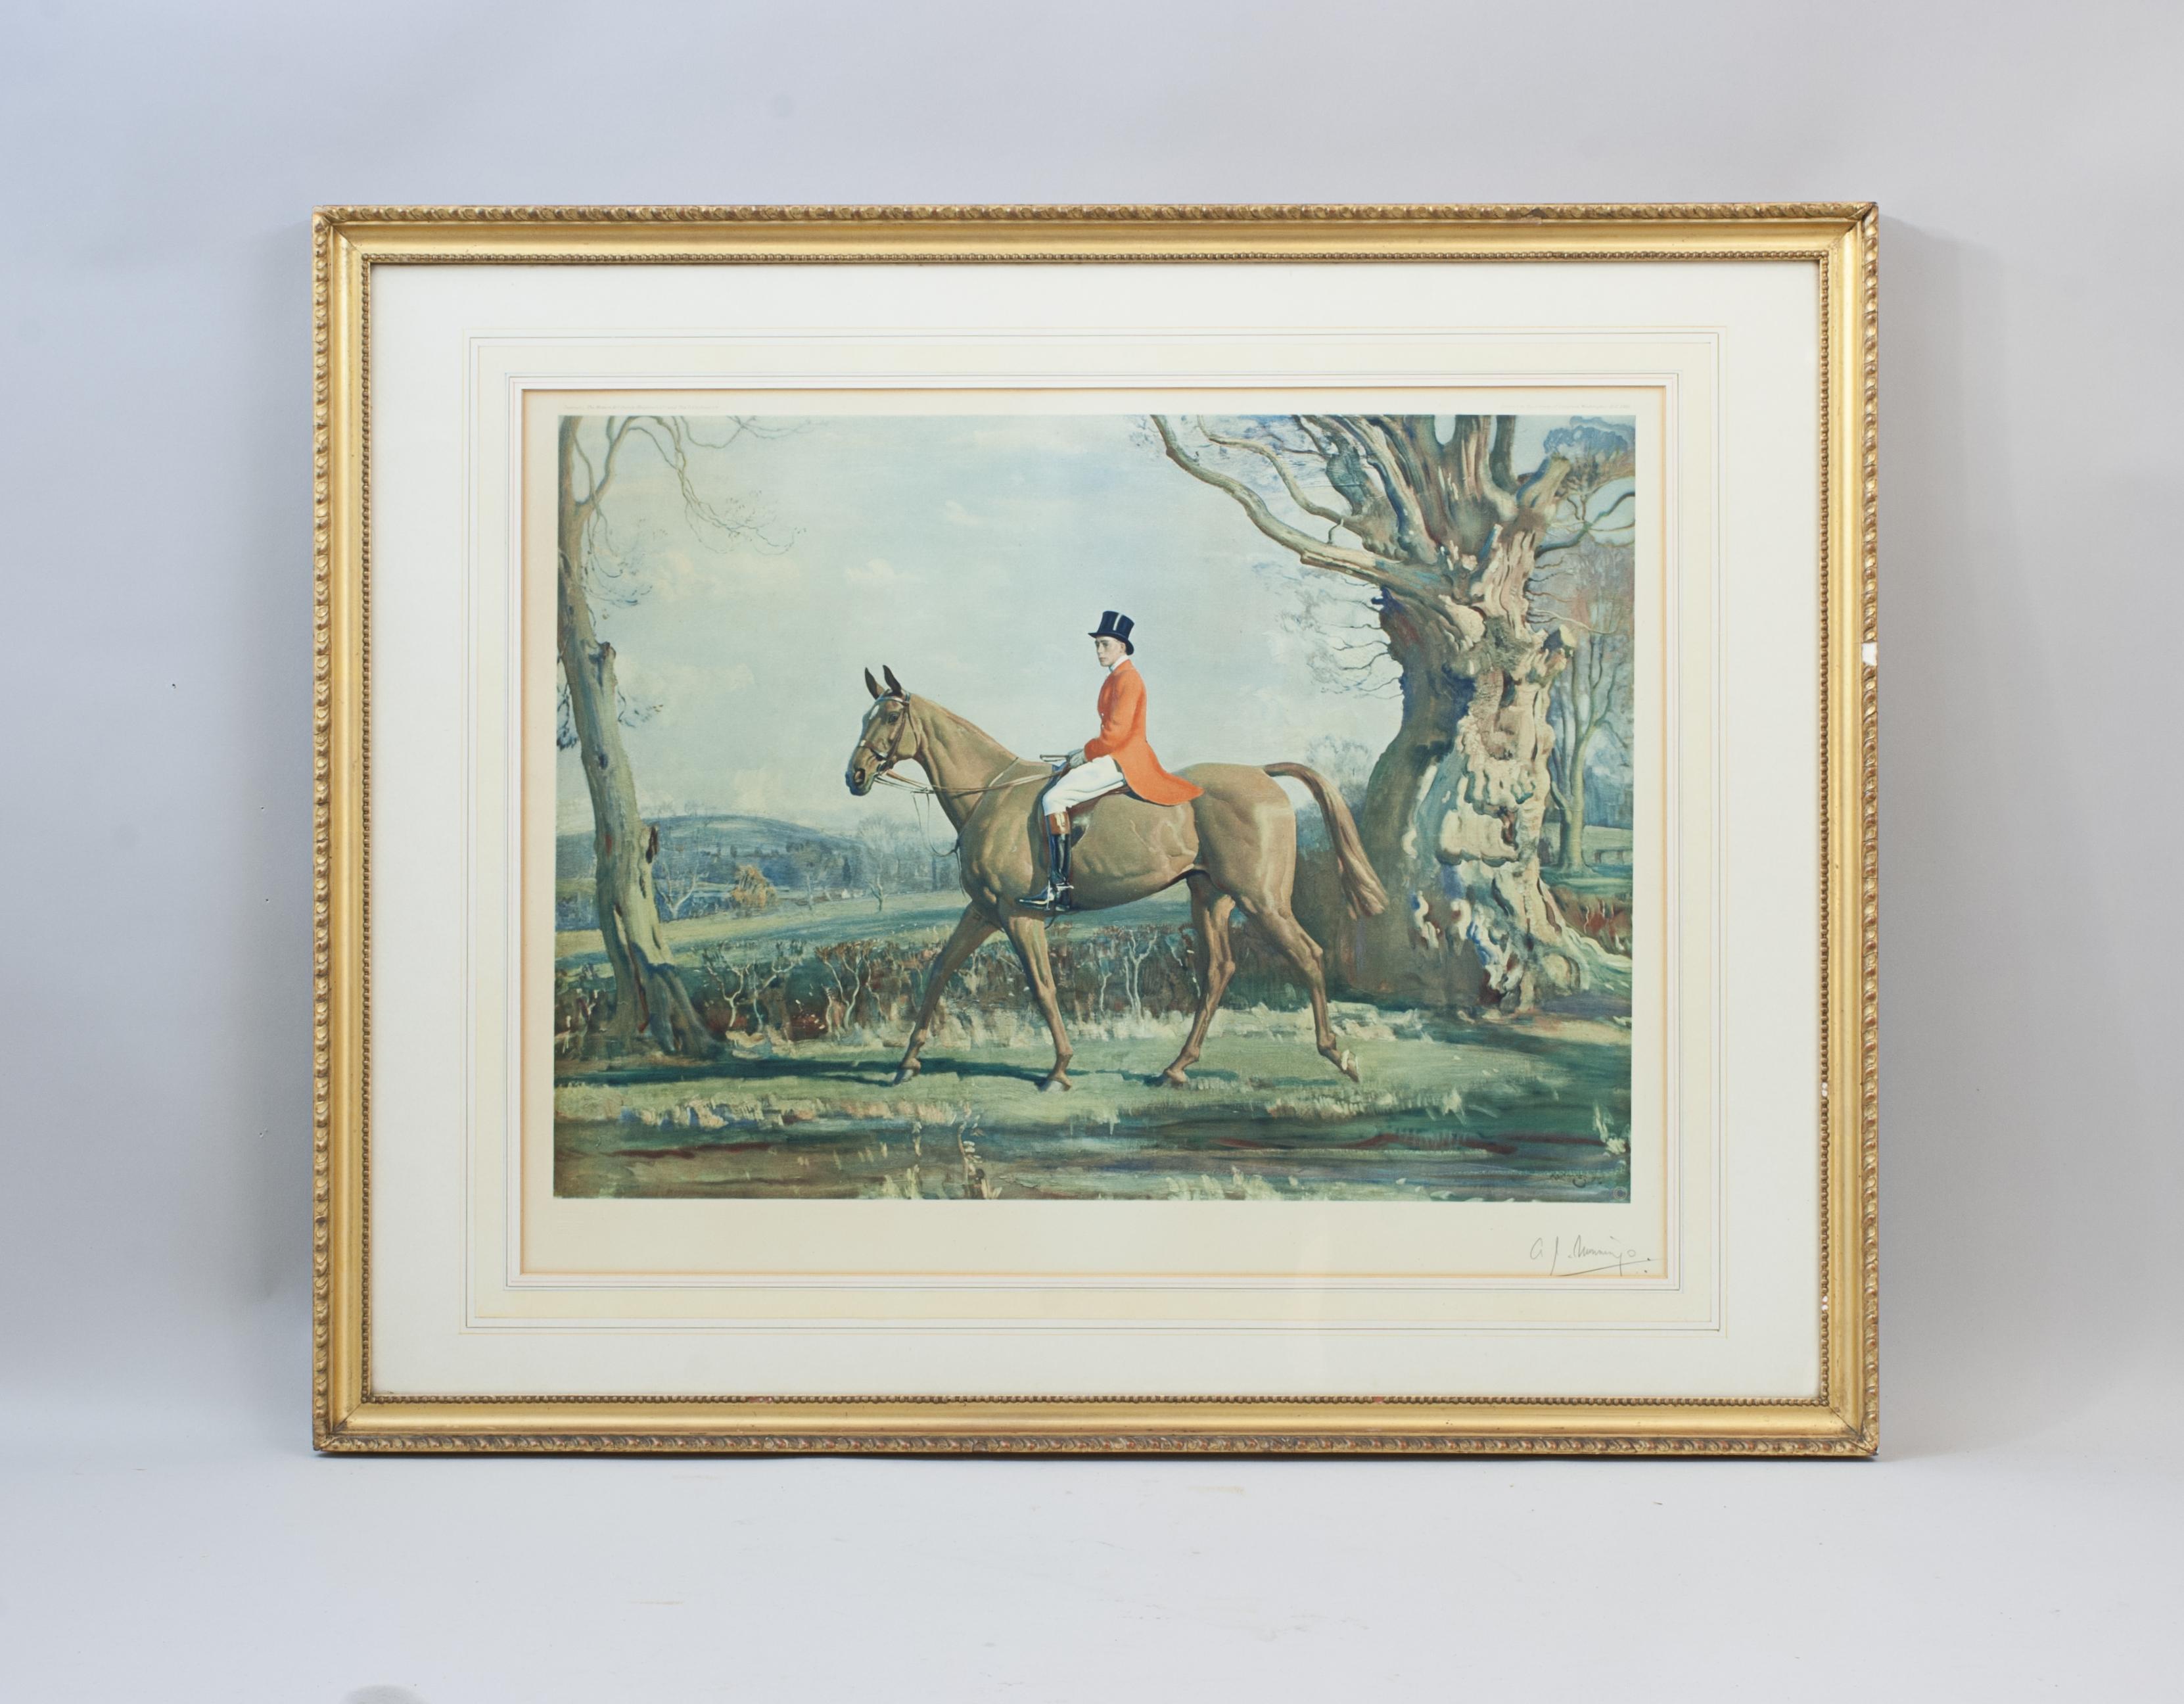 The Prince Of Wales By Alfred Munnings.
A rare and signed Sir Alfred Munnings coloured lithograph of H.R.H The Prince Of Wales, sat astride his chestnut hunter, Forest Witch. King Edward VIII, as Prince of Wales, can be seen dressed for a fox hunt